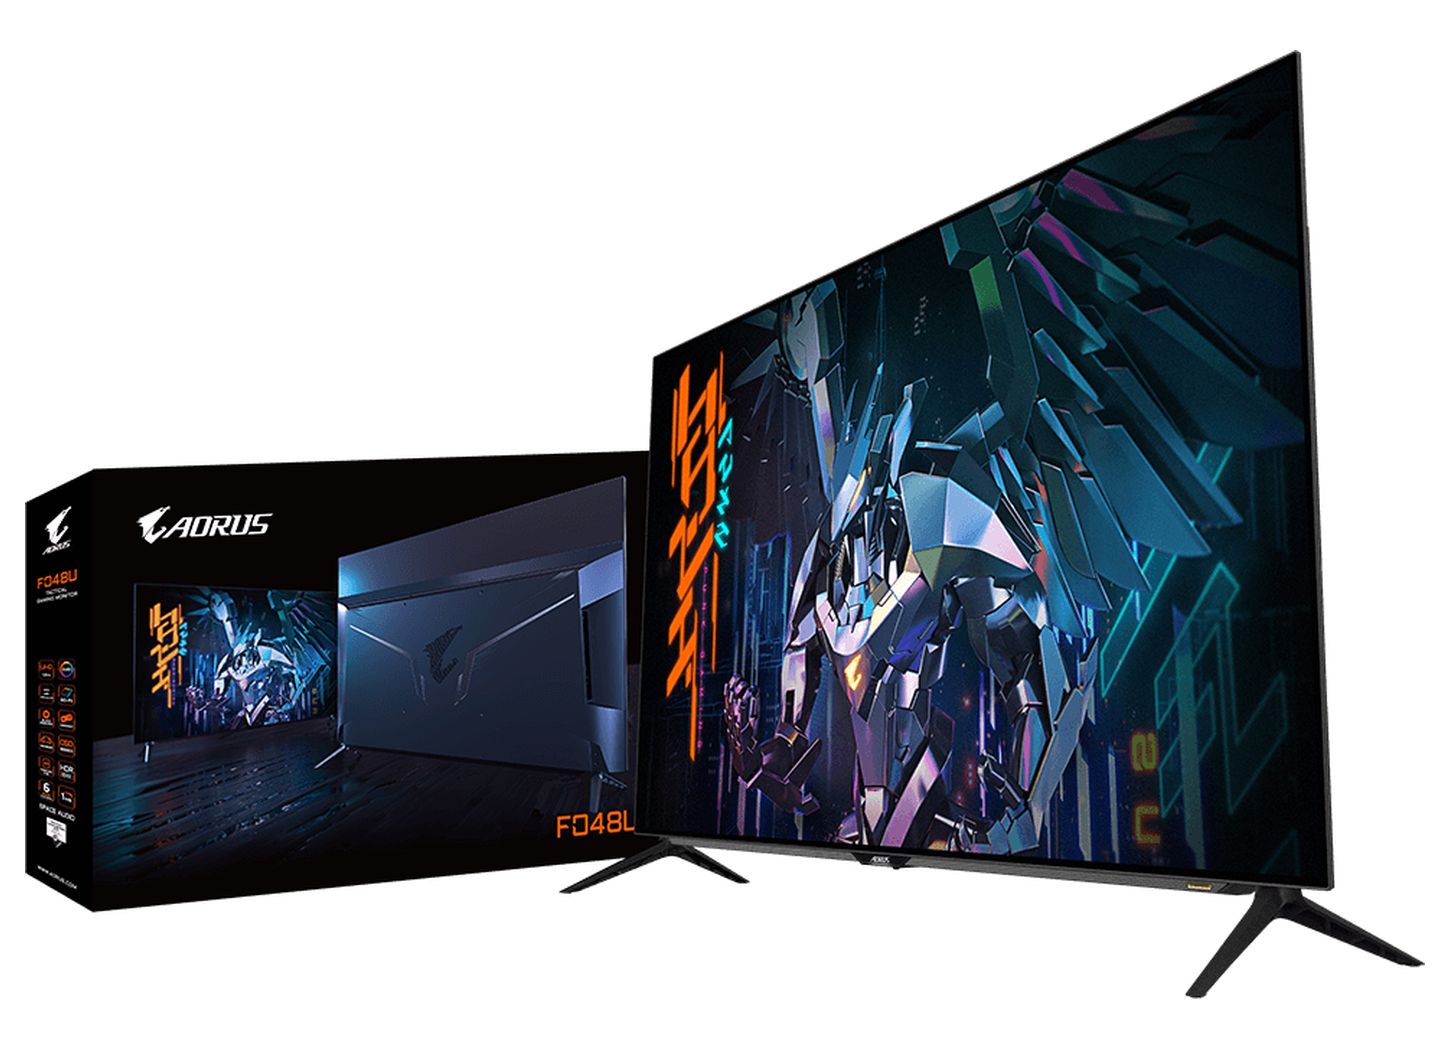 Gigabyte details its AORUS FO48U OLED 120Hz gaming monitor with 